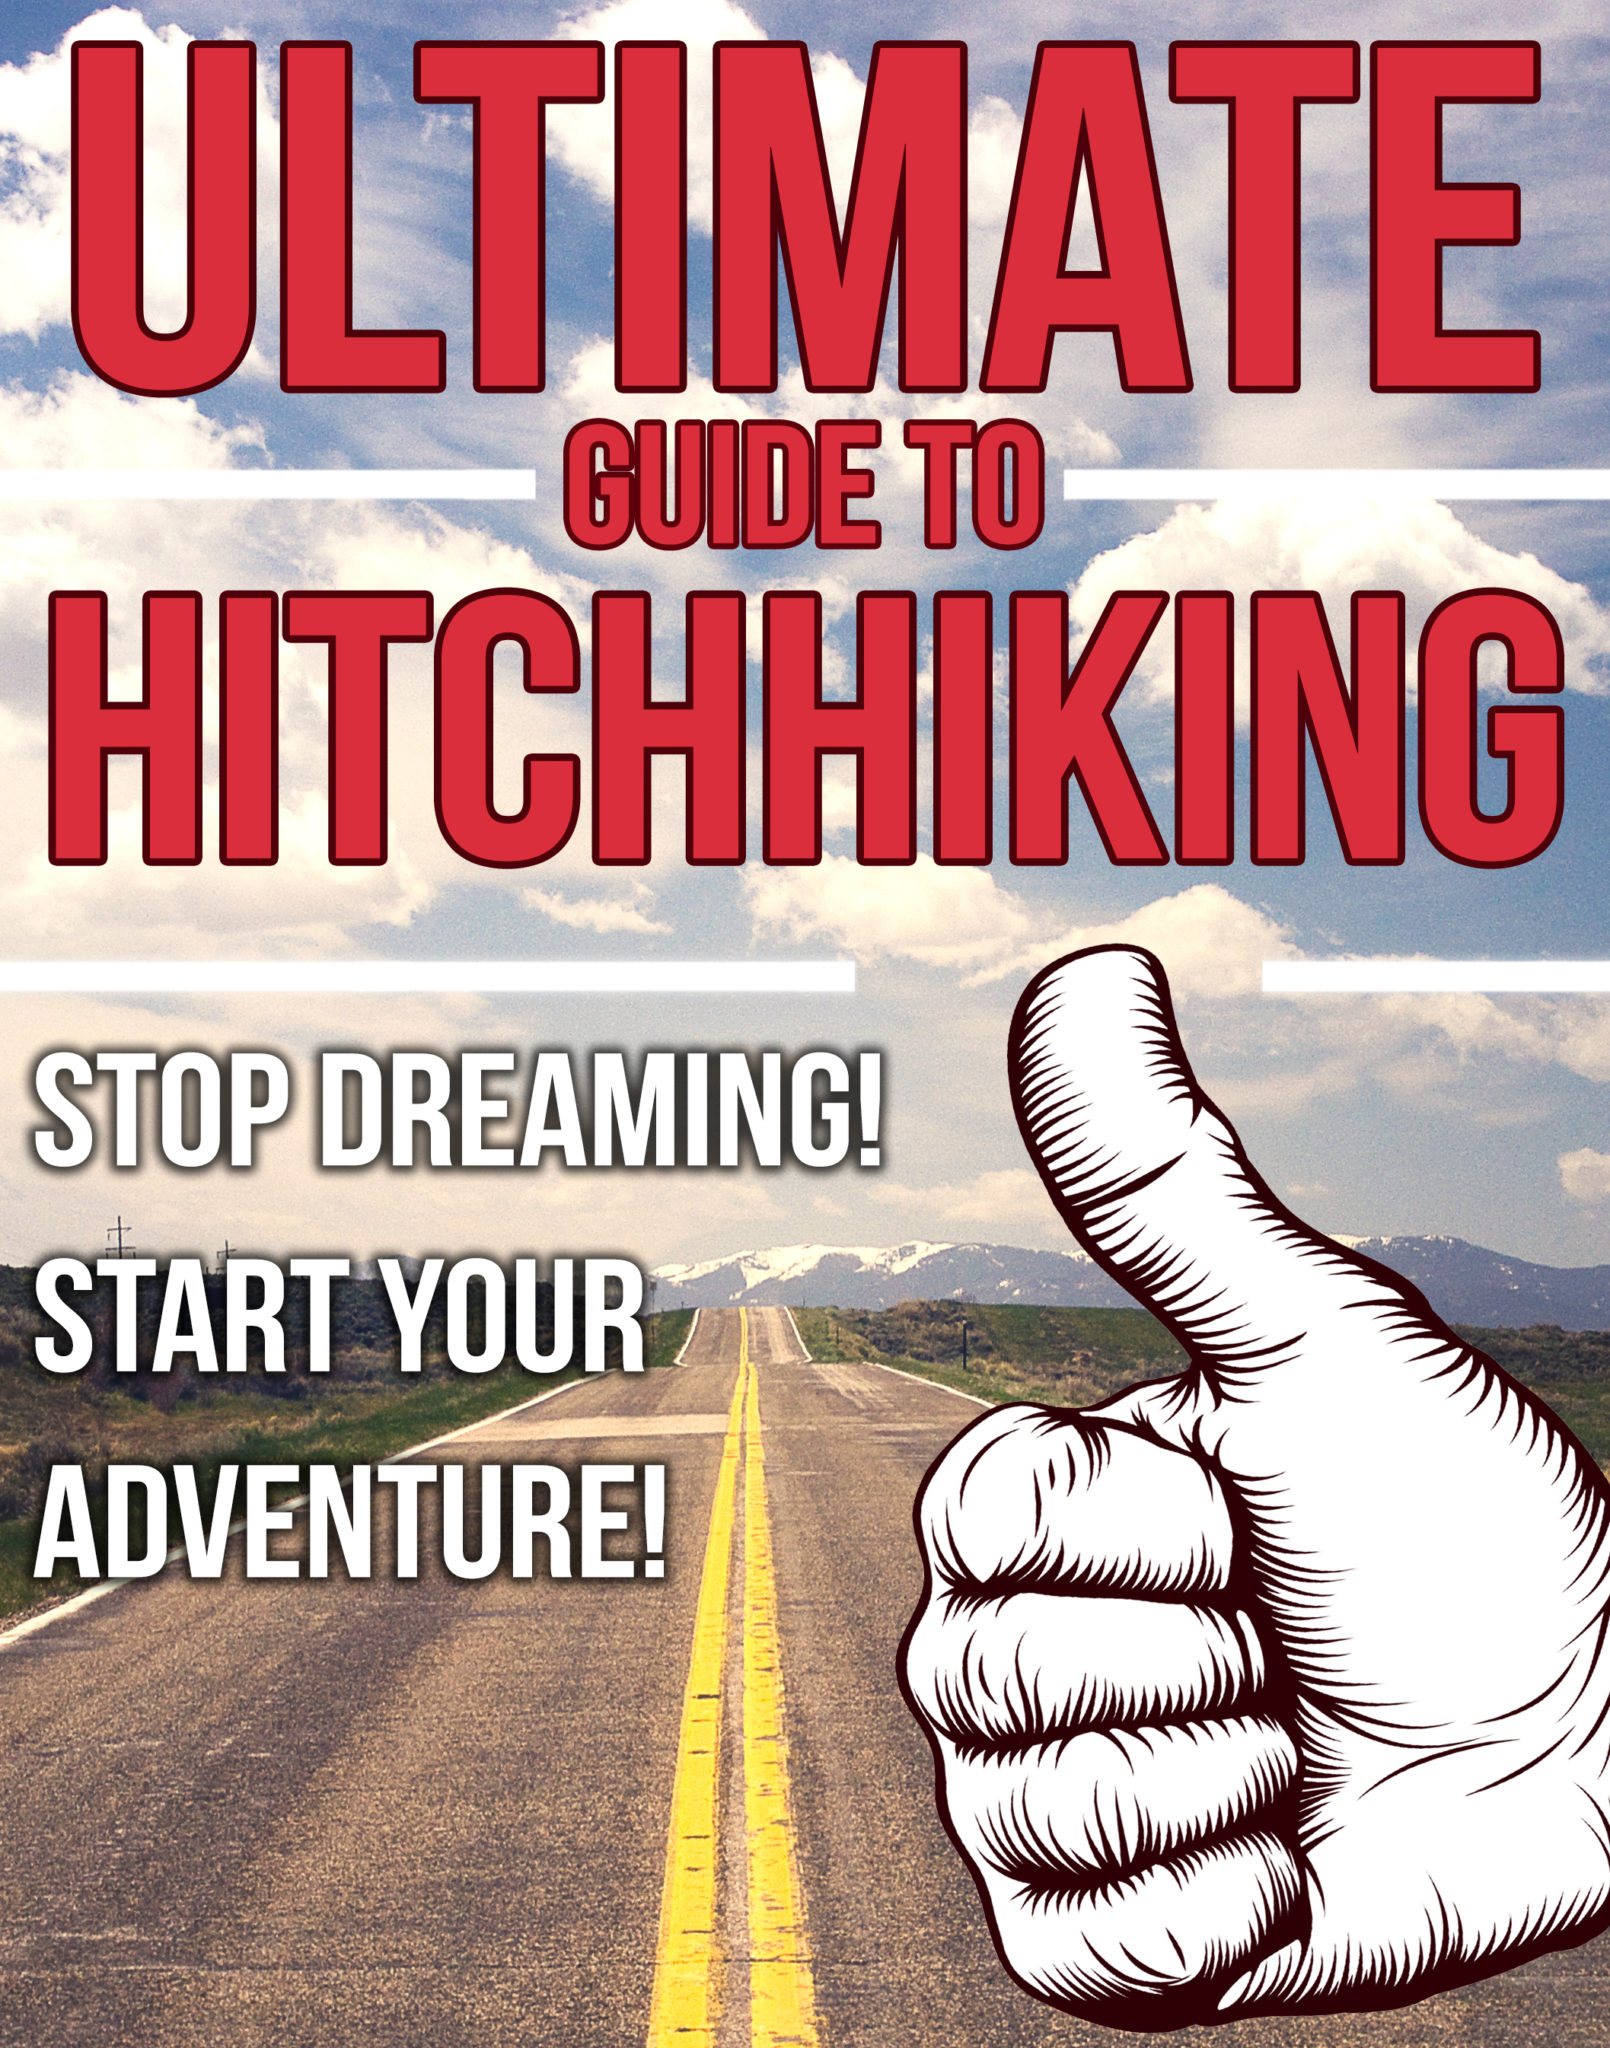 FREE: The Ultimate Guide to Hitchhiking – Stop Dreaming! Start Your Adventure! by Jessica speed